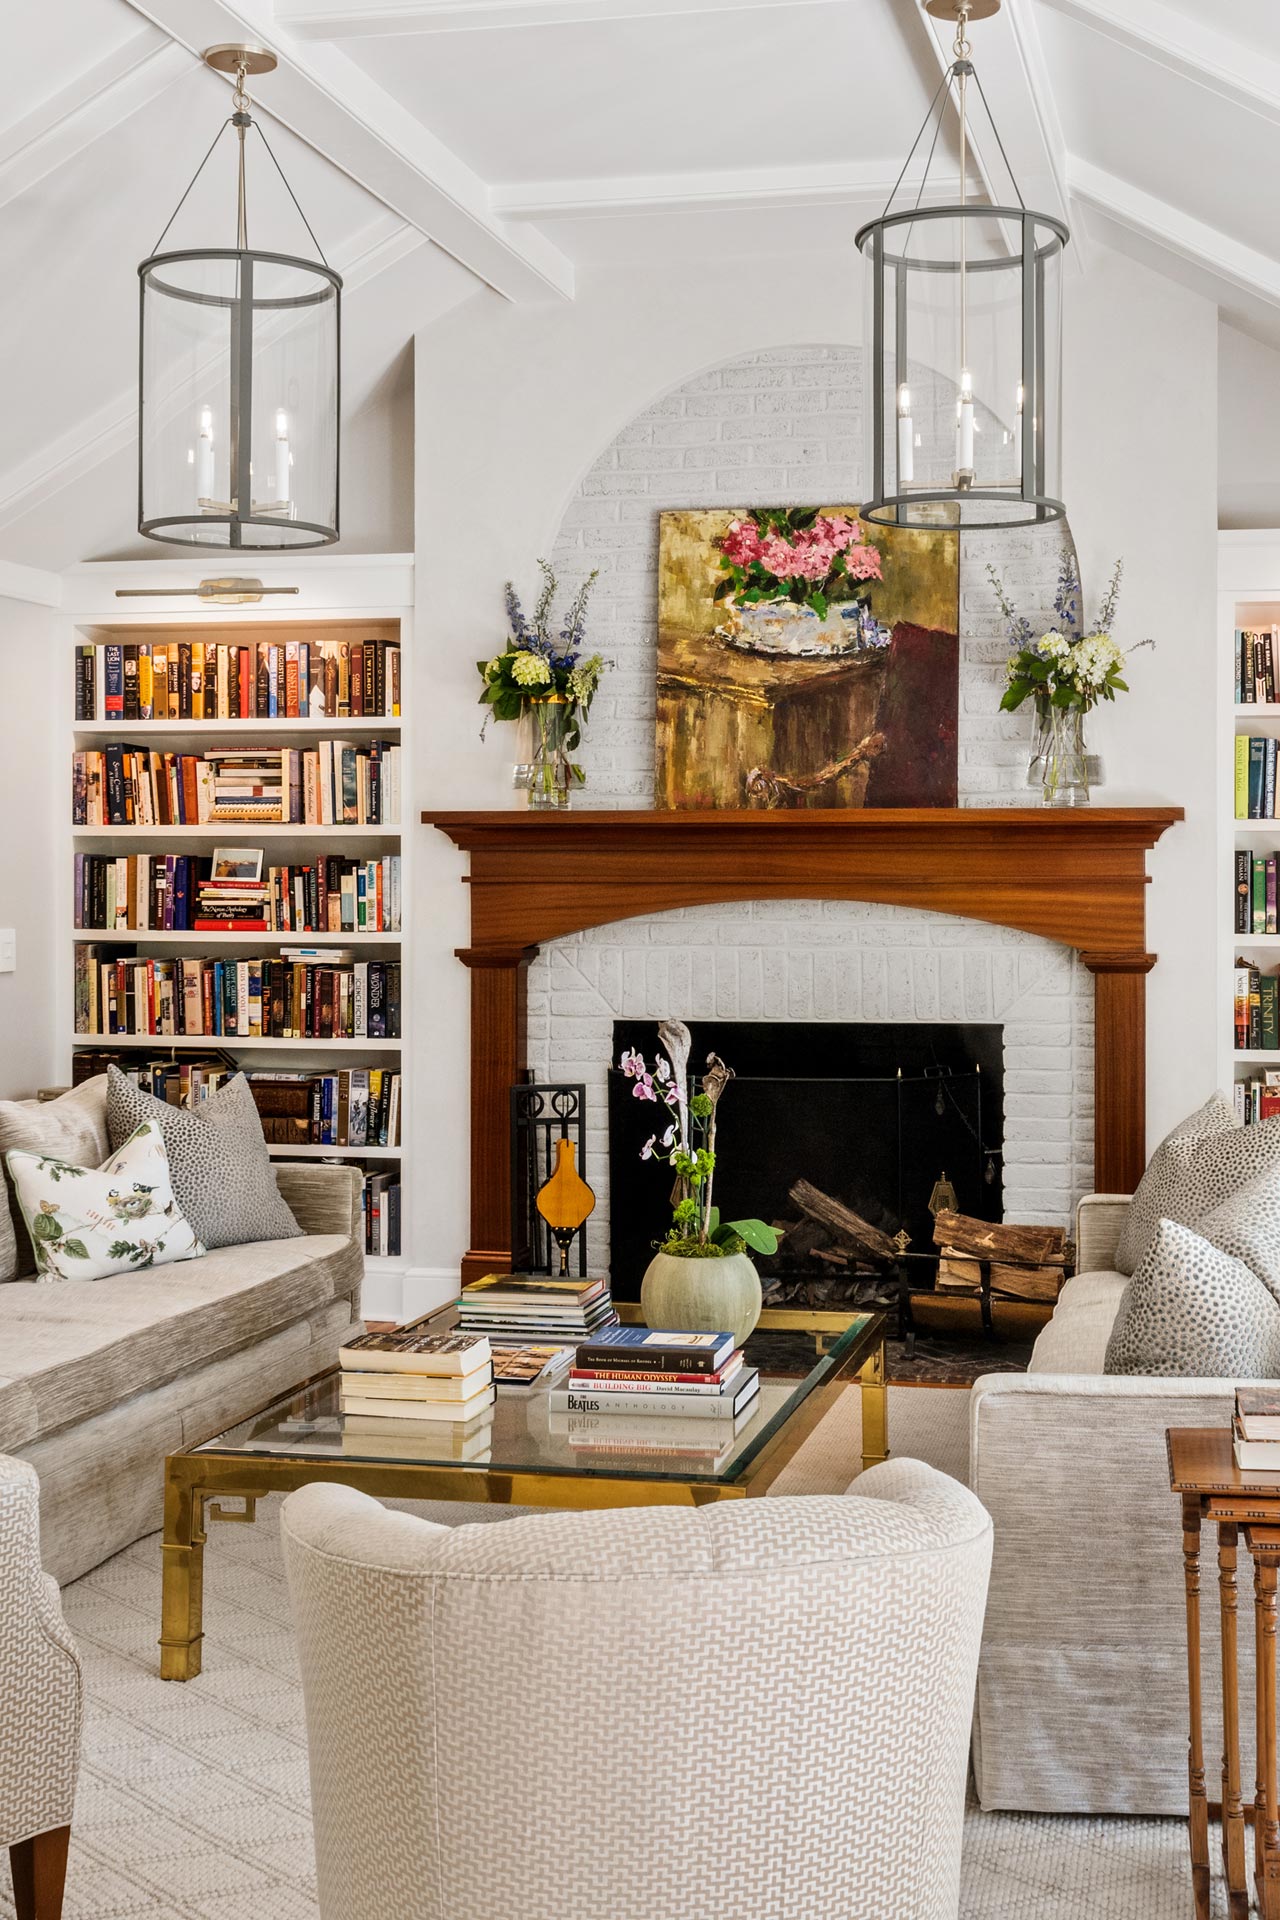 White brick fireplace with wood mantel and surround and built-in bookcases